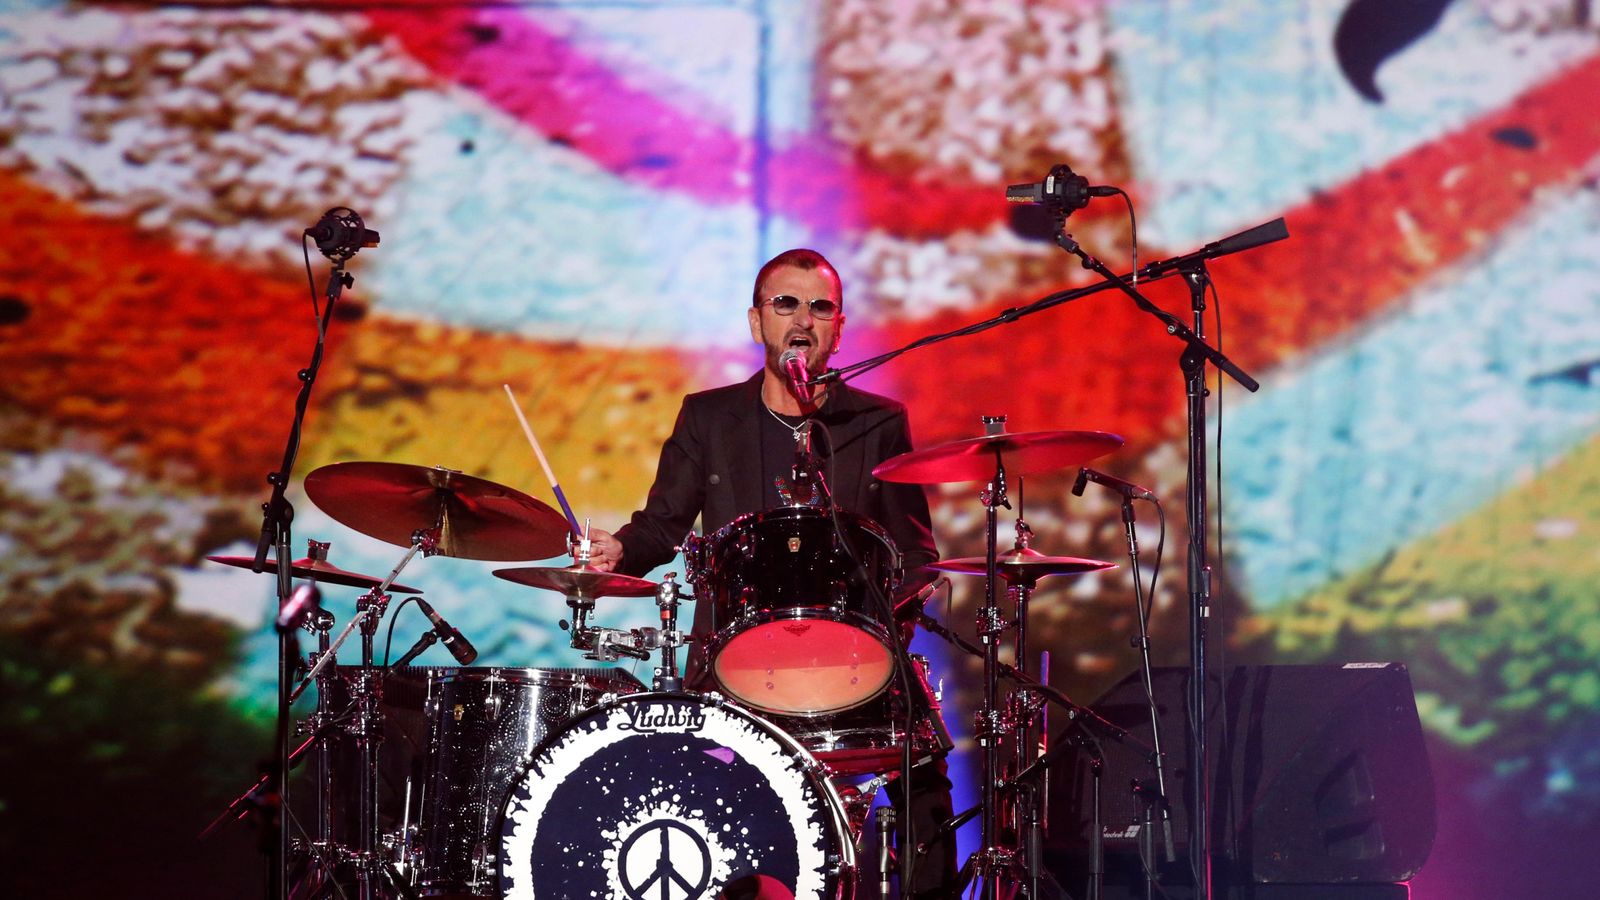 In defence of Ringo Starr – a masterful drummer and the Beatles' unsung  genius, Ringo Starr